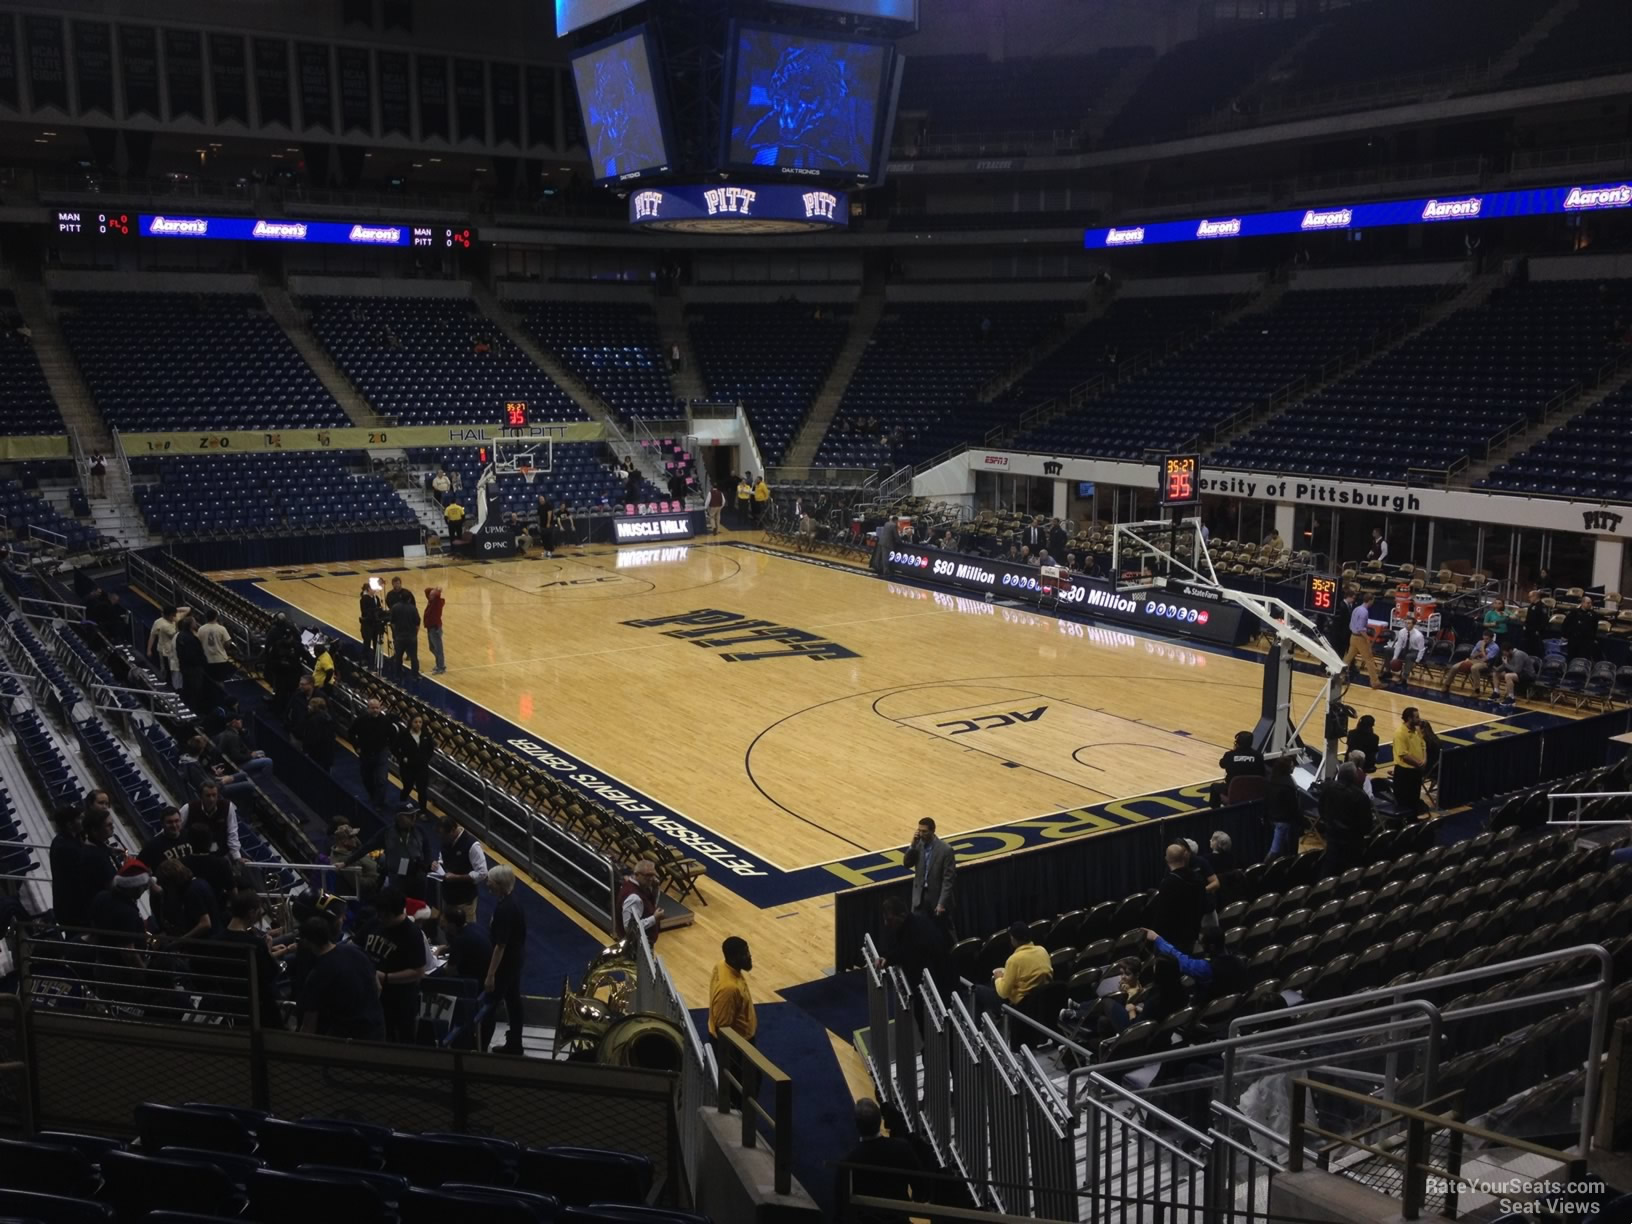 section 104, row n seat view  - petersen events center